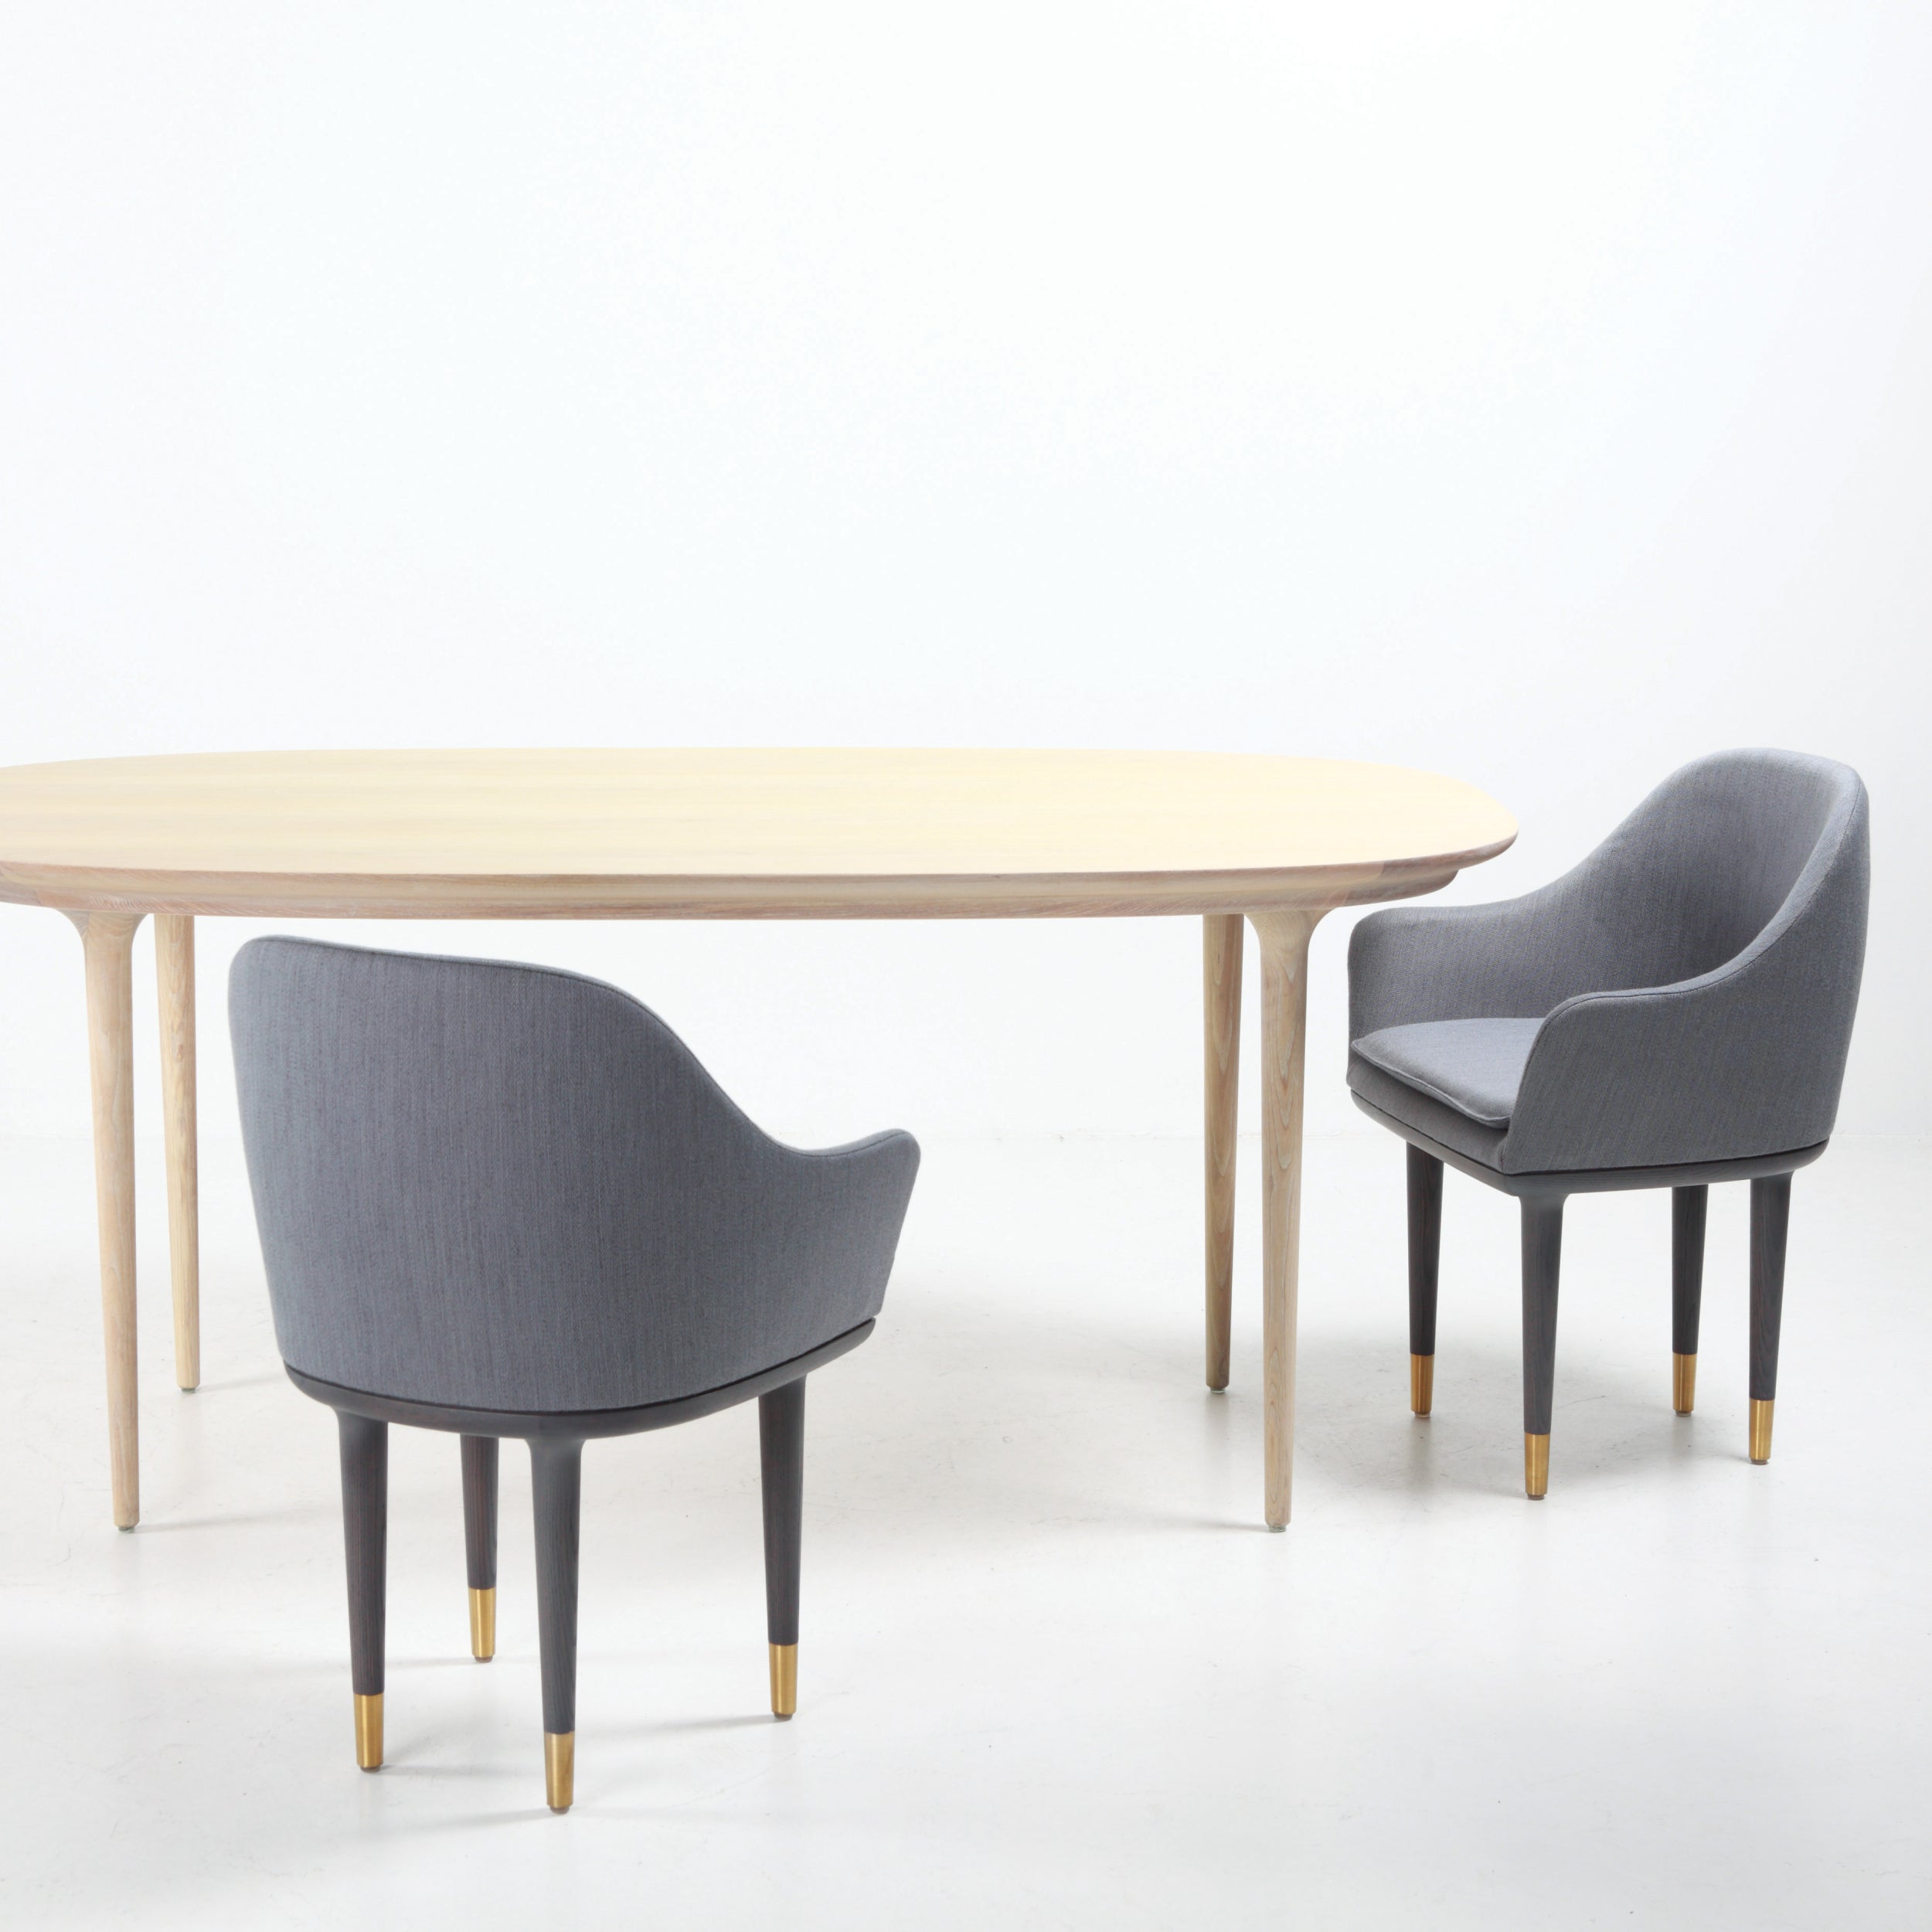 Lunar Dining Chair: Large